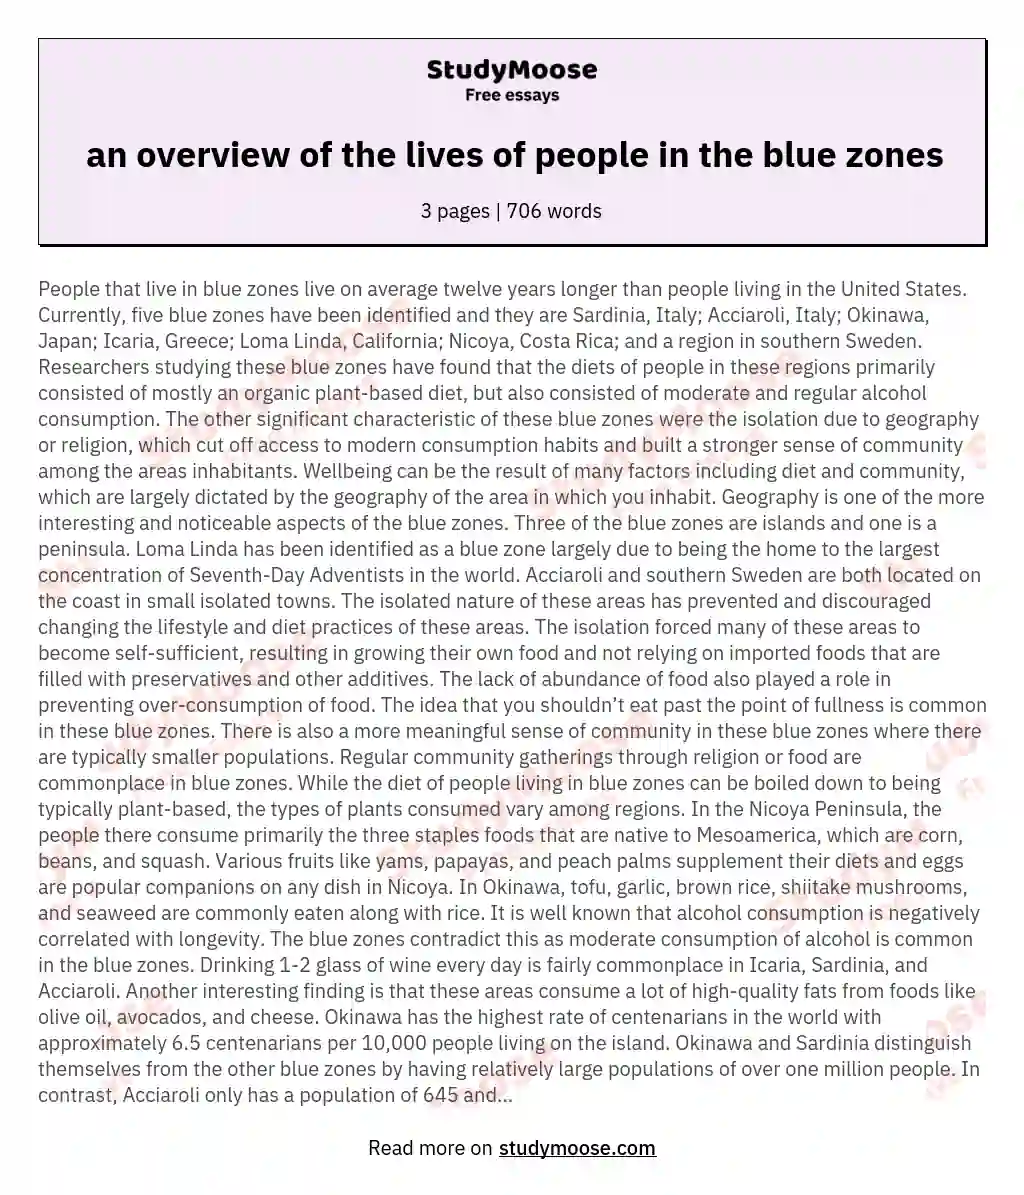 an overview of the lives of people in the blue zones essay